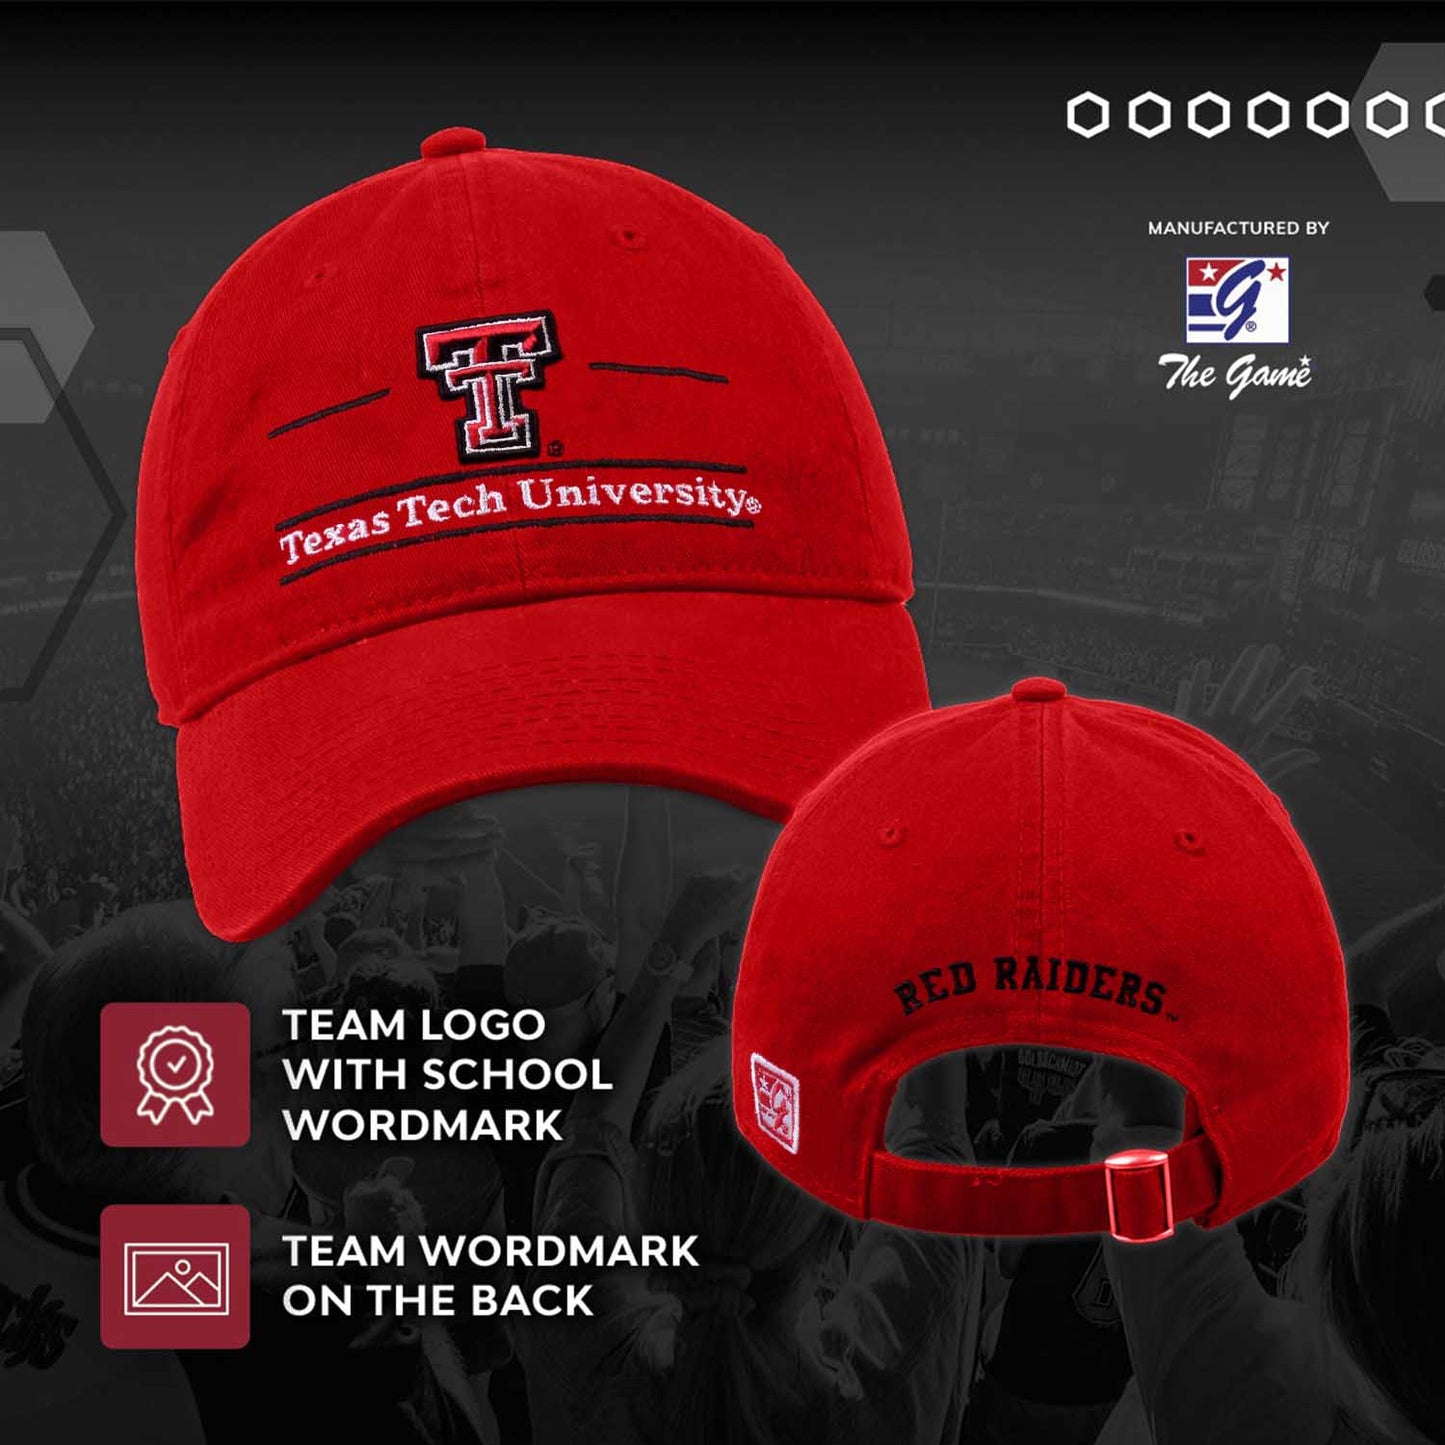 Texas Tech Red Raiders NCAA Adult Bar Hat - Red